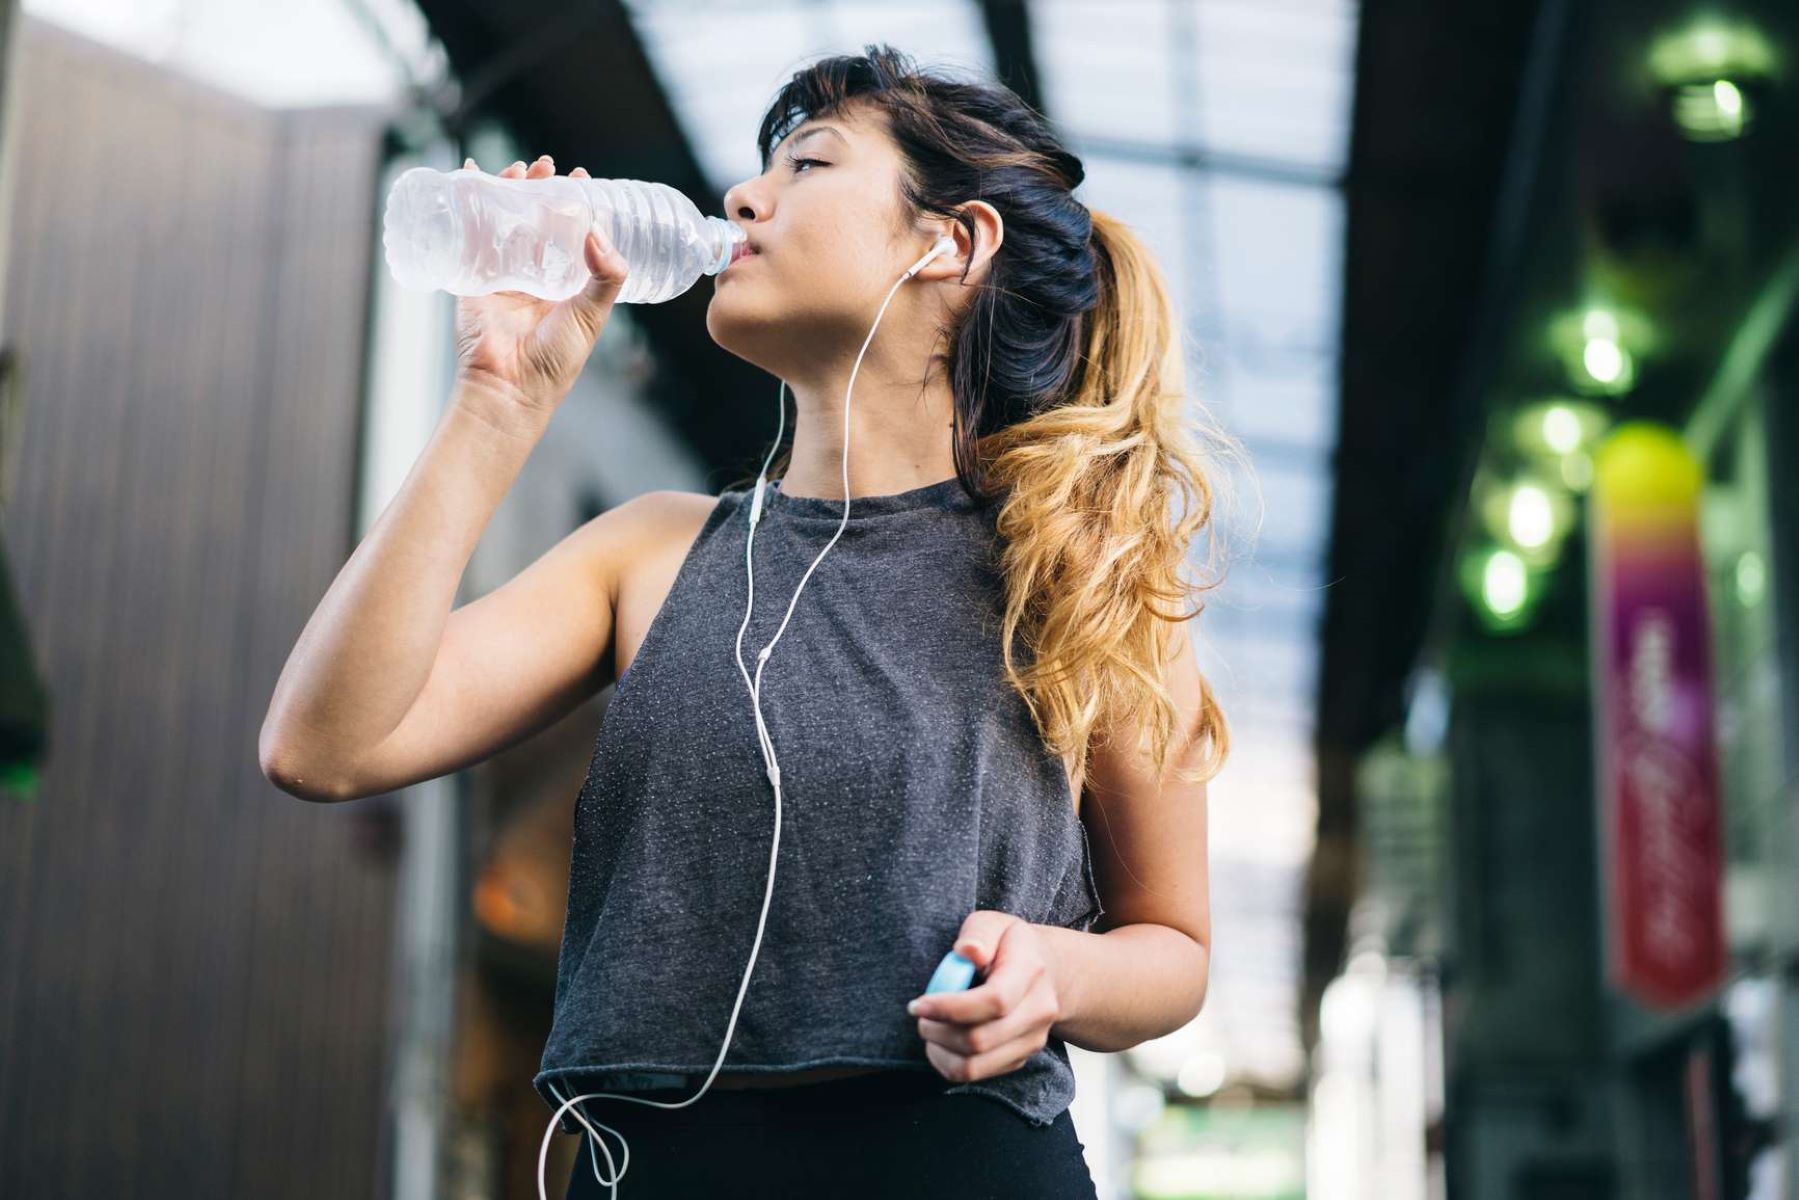 What To Drink During A Workout